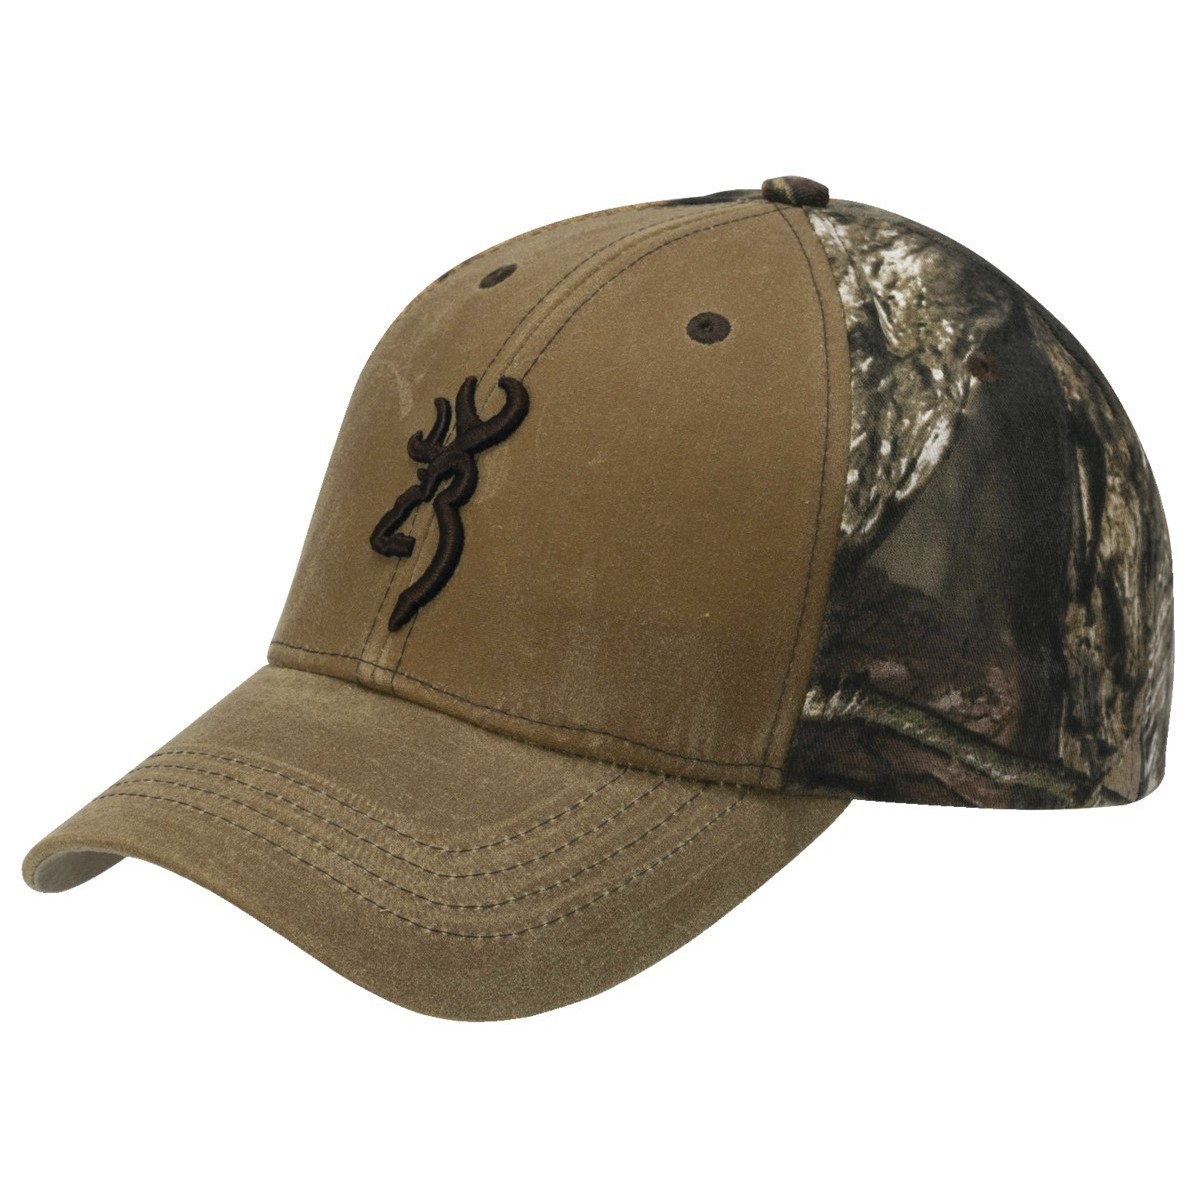 CASQUETTE BROWNING OPENNING DAY OLIVE/CAMO RTX T. UNIQUE